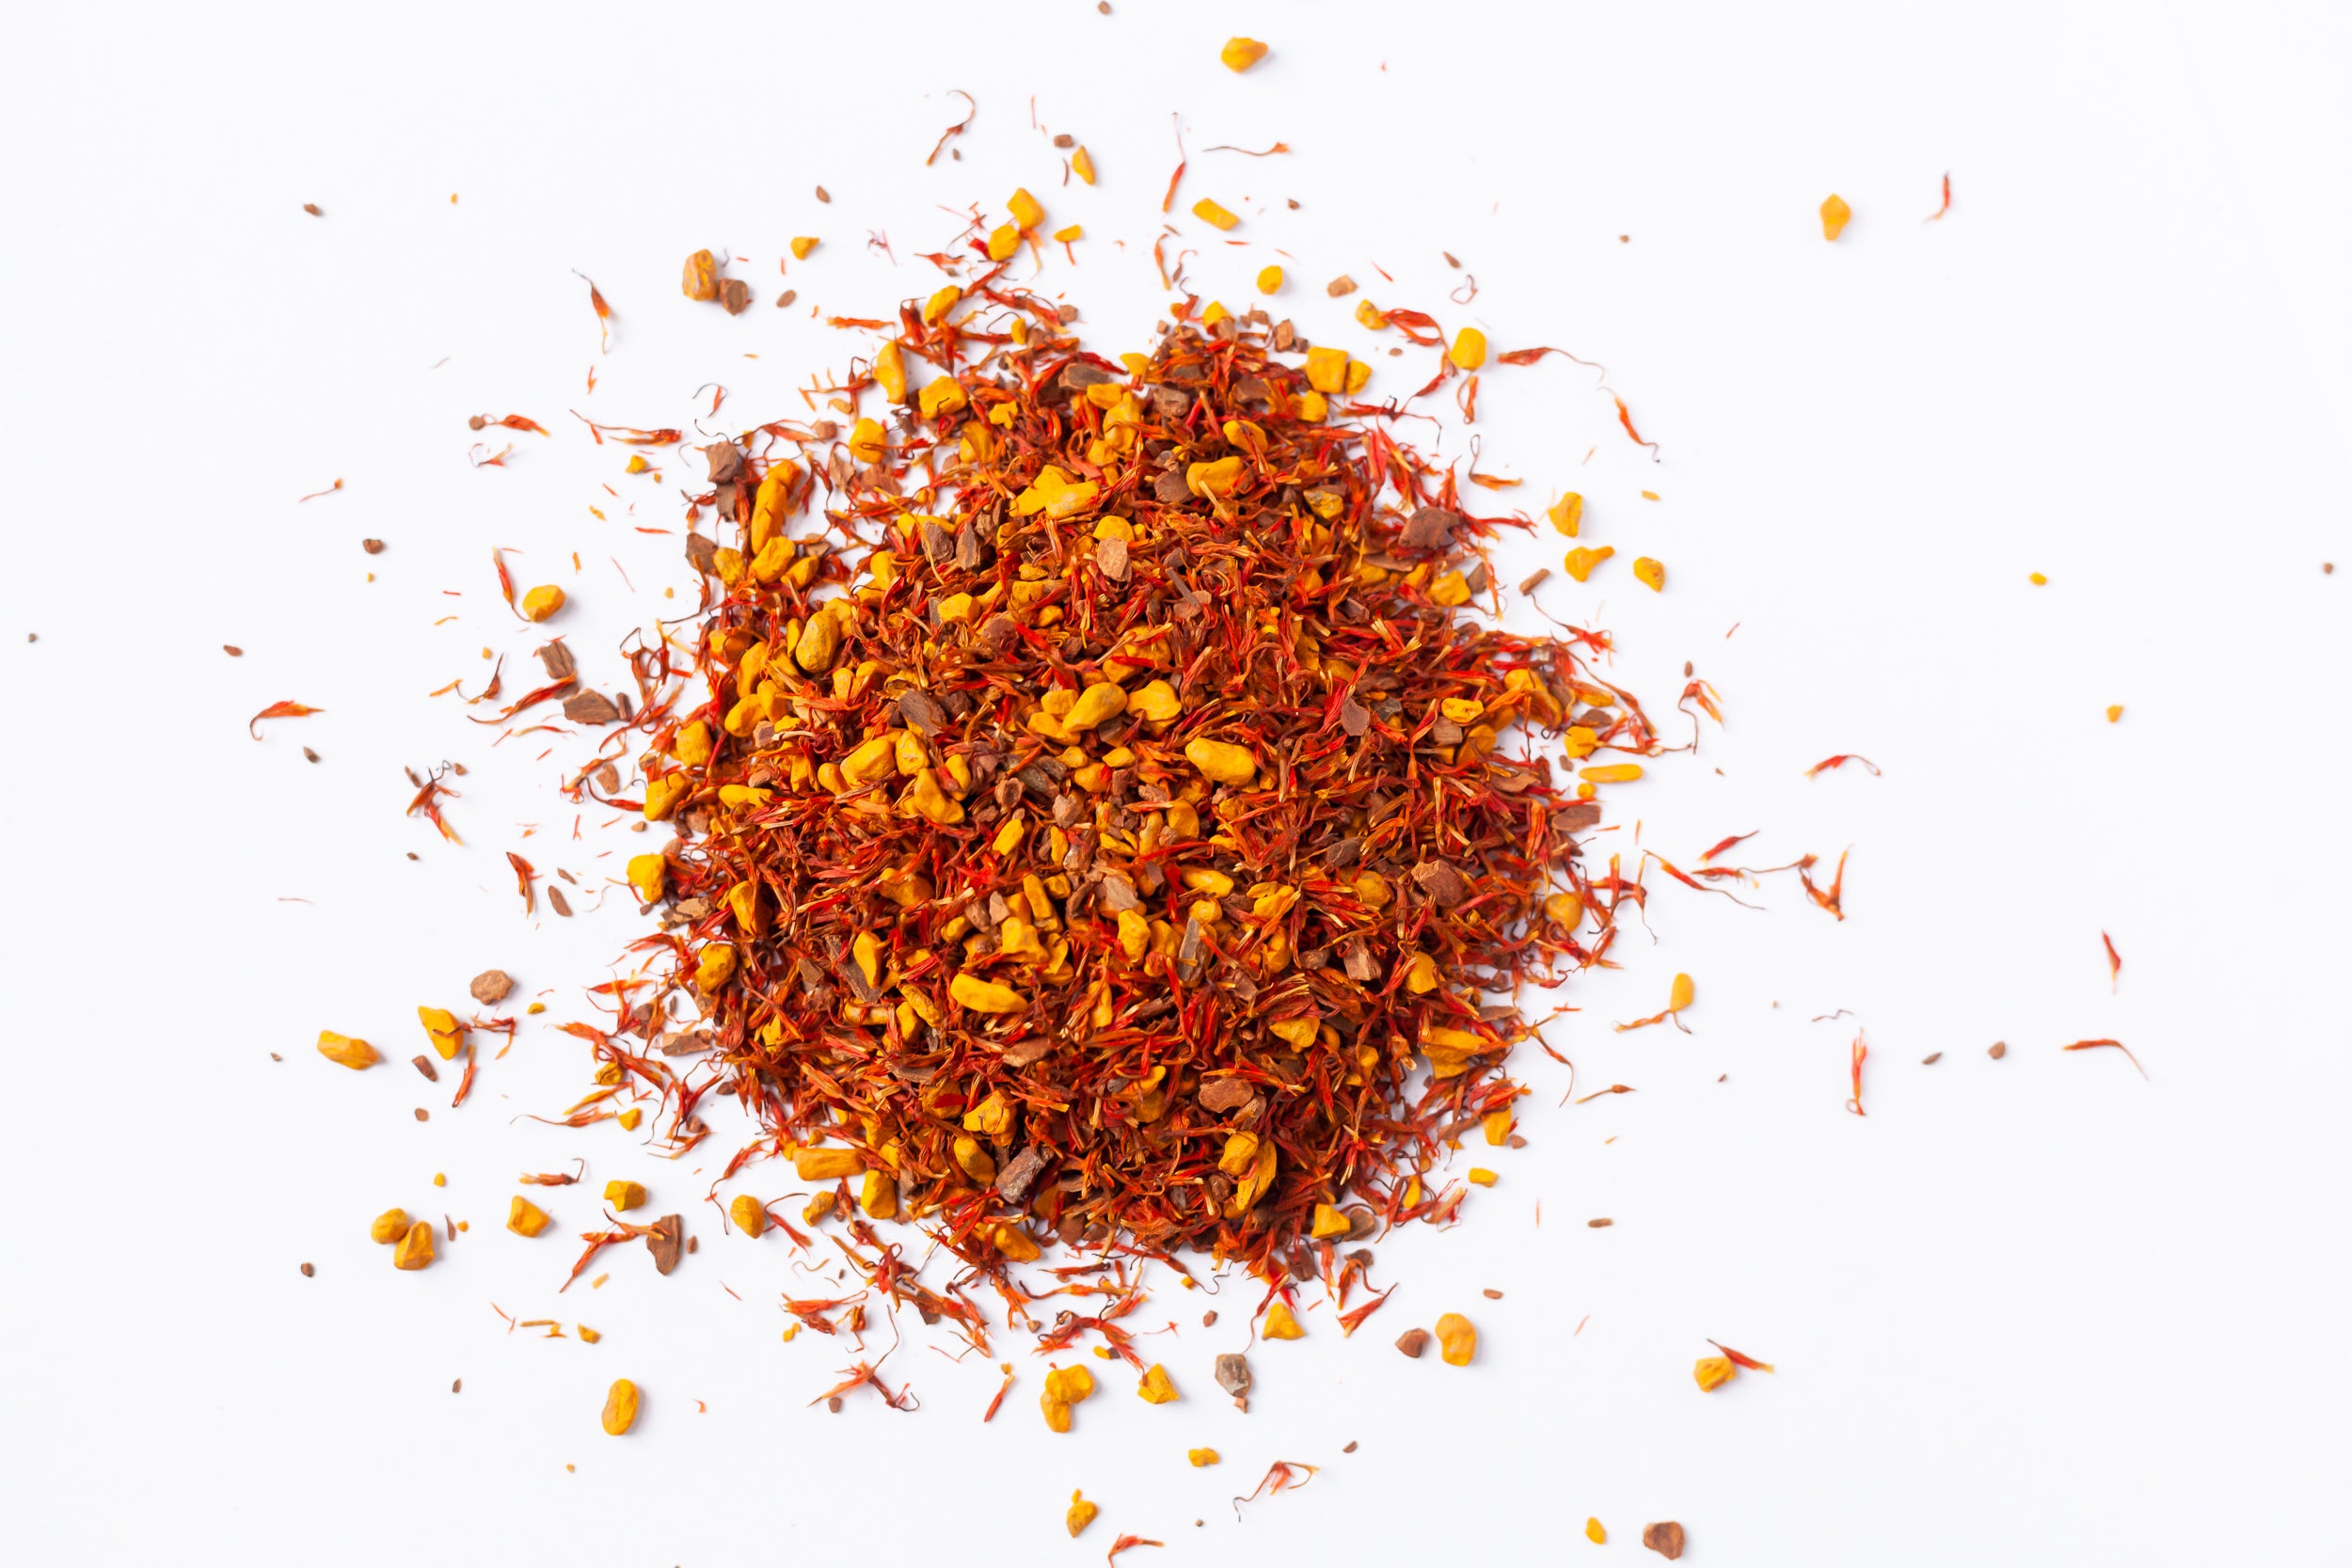 liver health tonic herbs featuring turmeric, cinnamon, and safflower